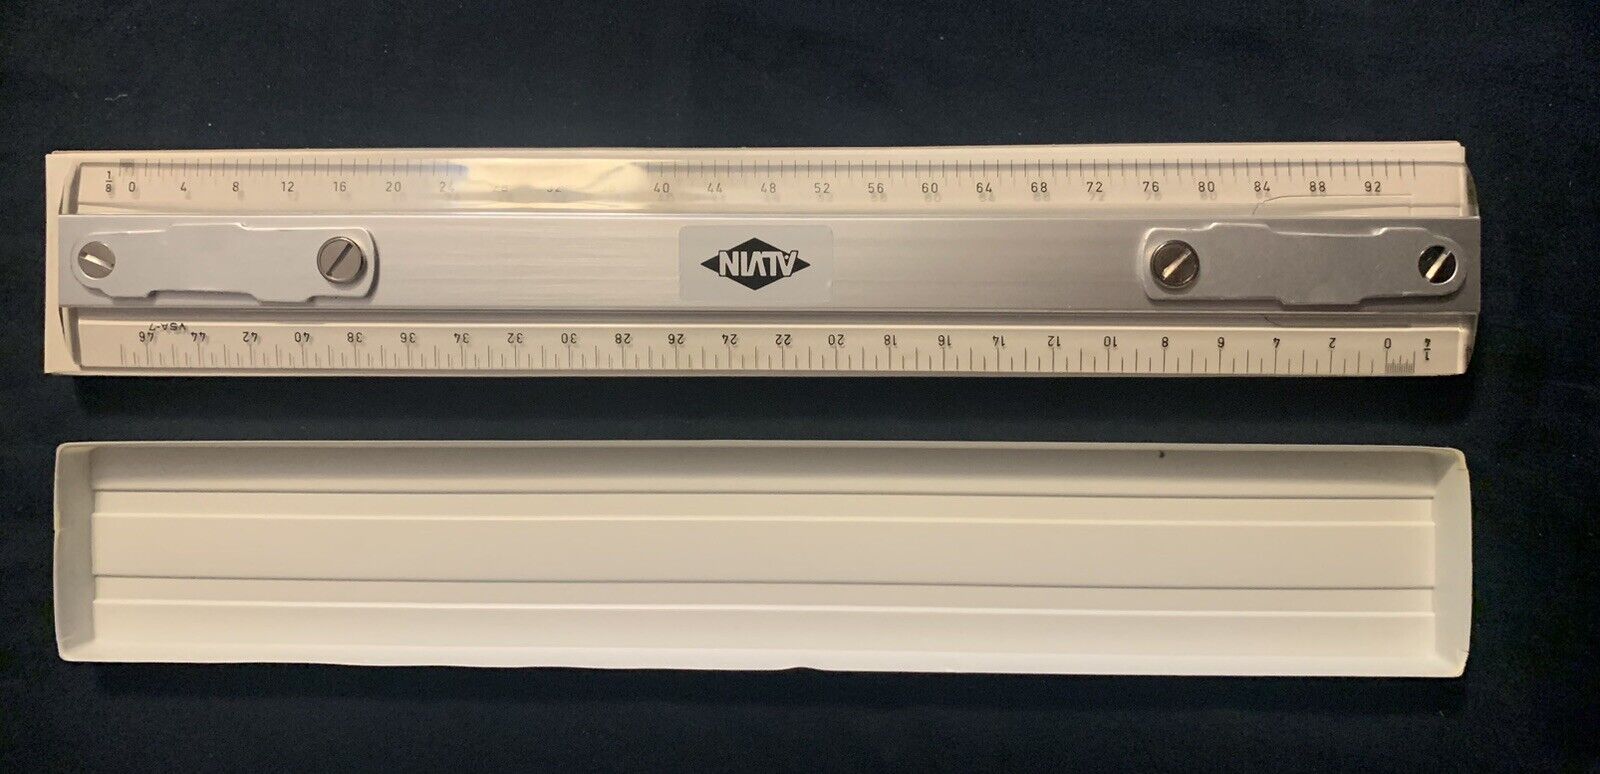 VSA 7-12 ALVIN Drafting Scale Aluminum Core W/Clear Inking Edge New Old Stock